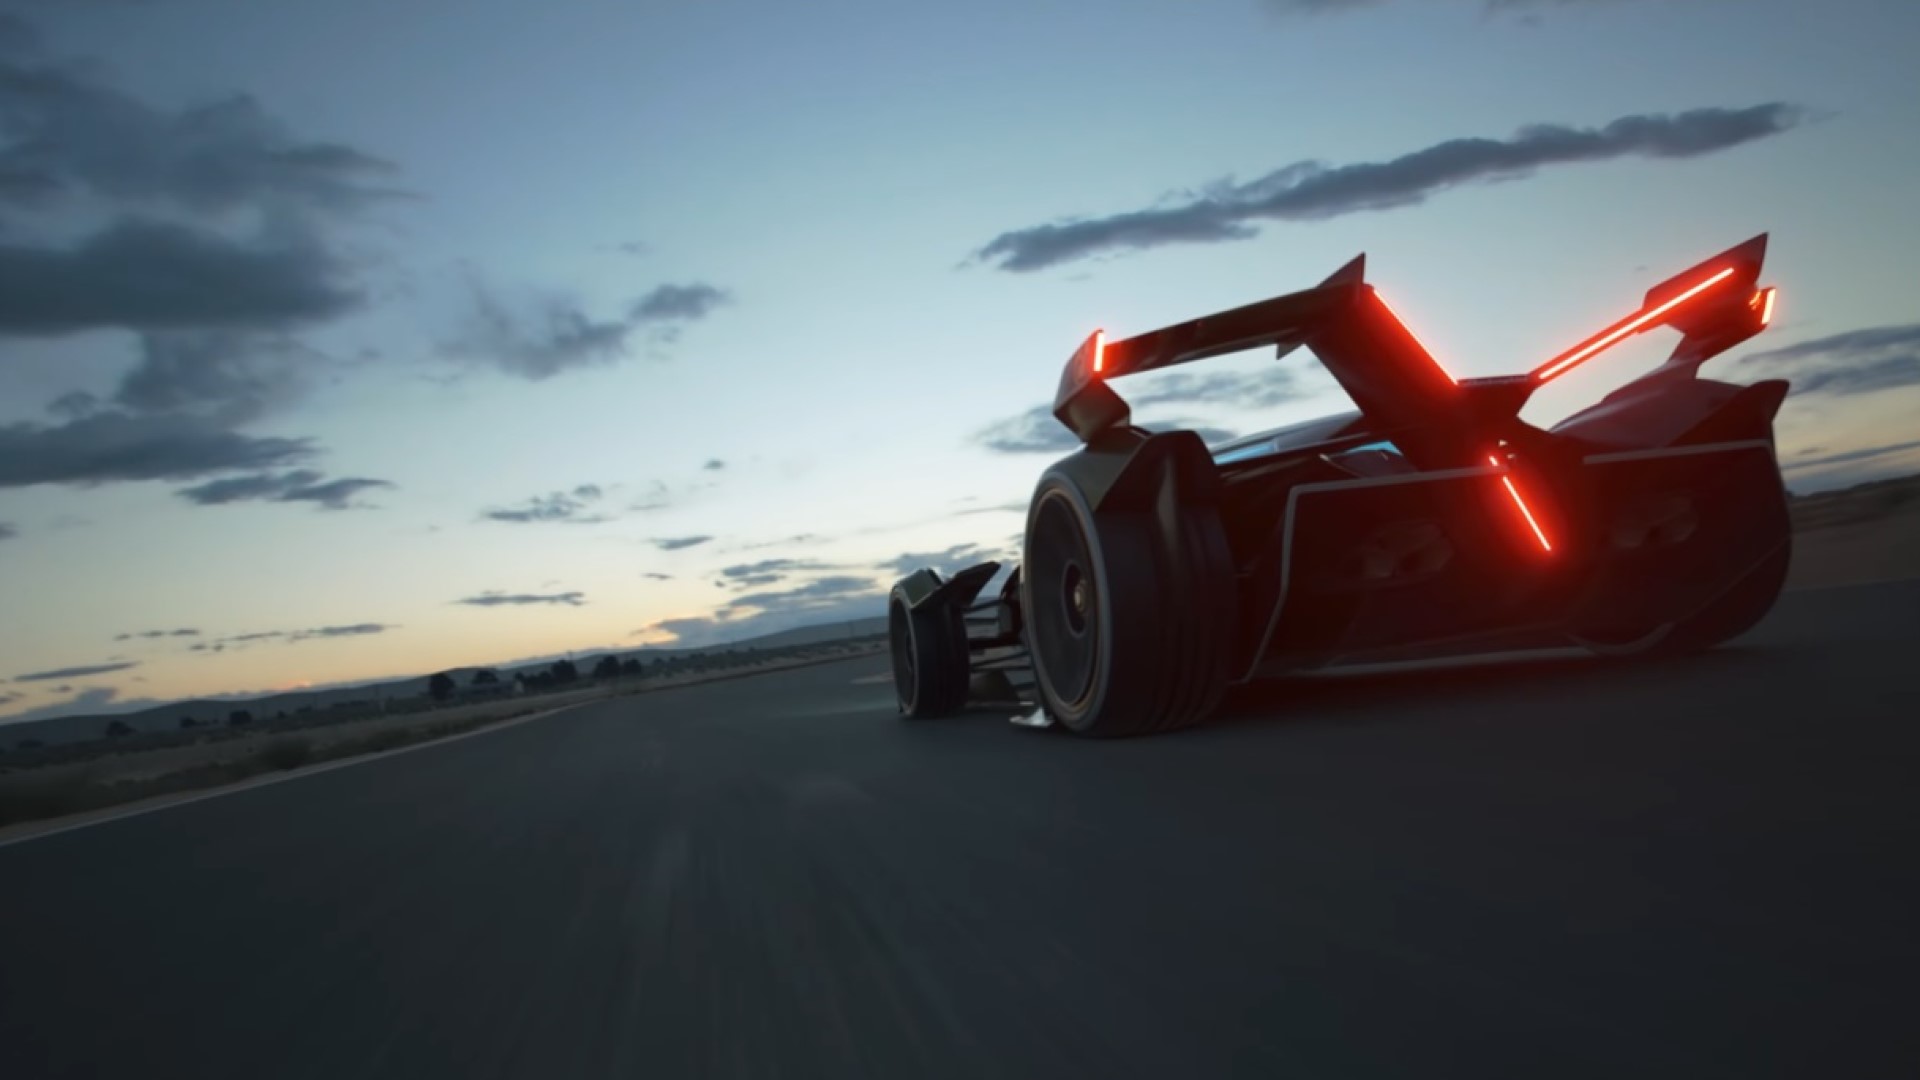 Gran Turismo 7 wallpapers for desktop download free Gran Turismo 7  pictures and backgrounds for PC  moborg